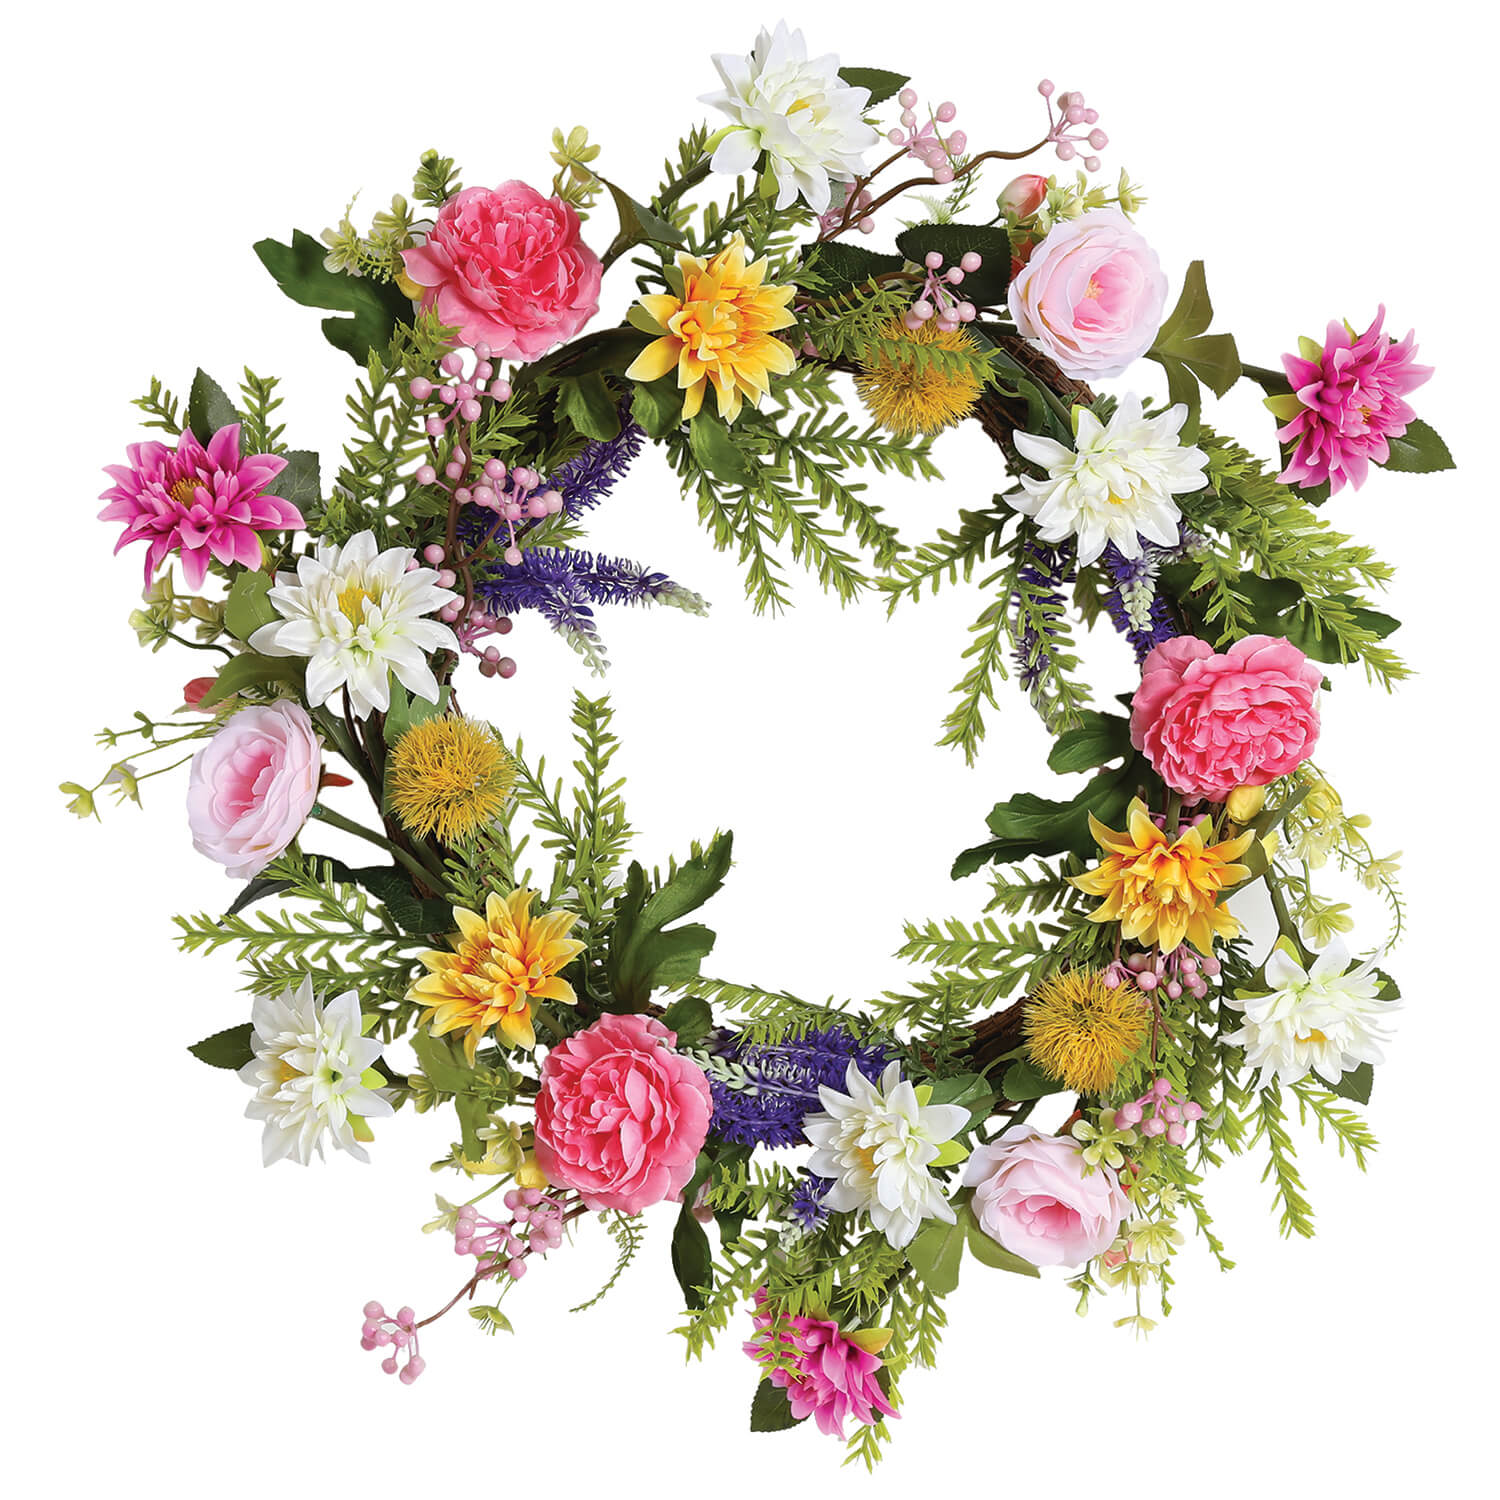 The Home Collection Floral Wreath - 50cm 1 Shaws Department Stores